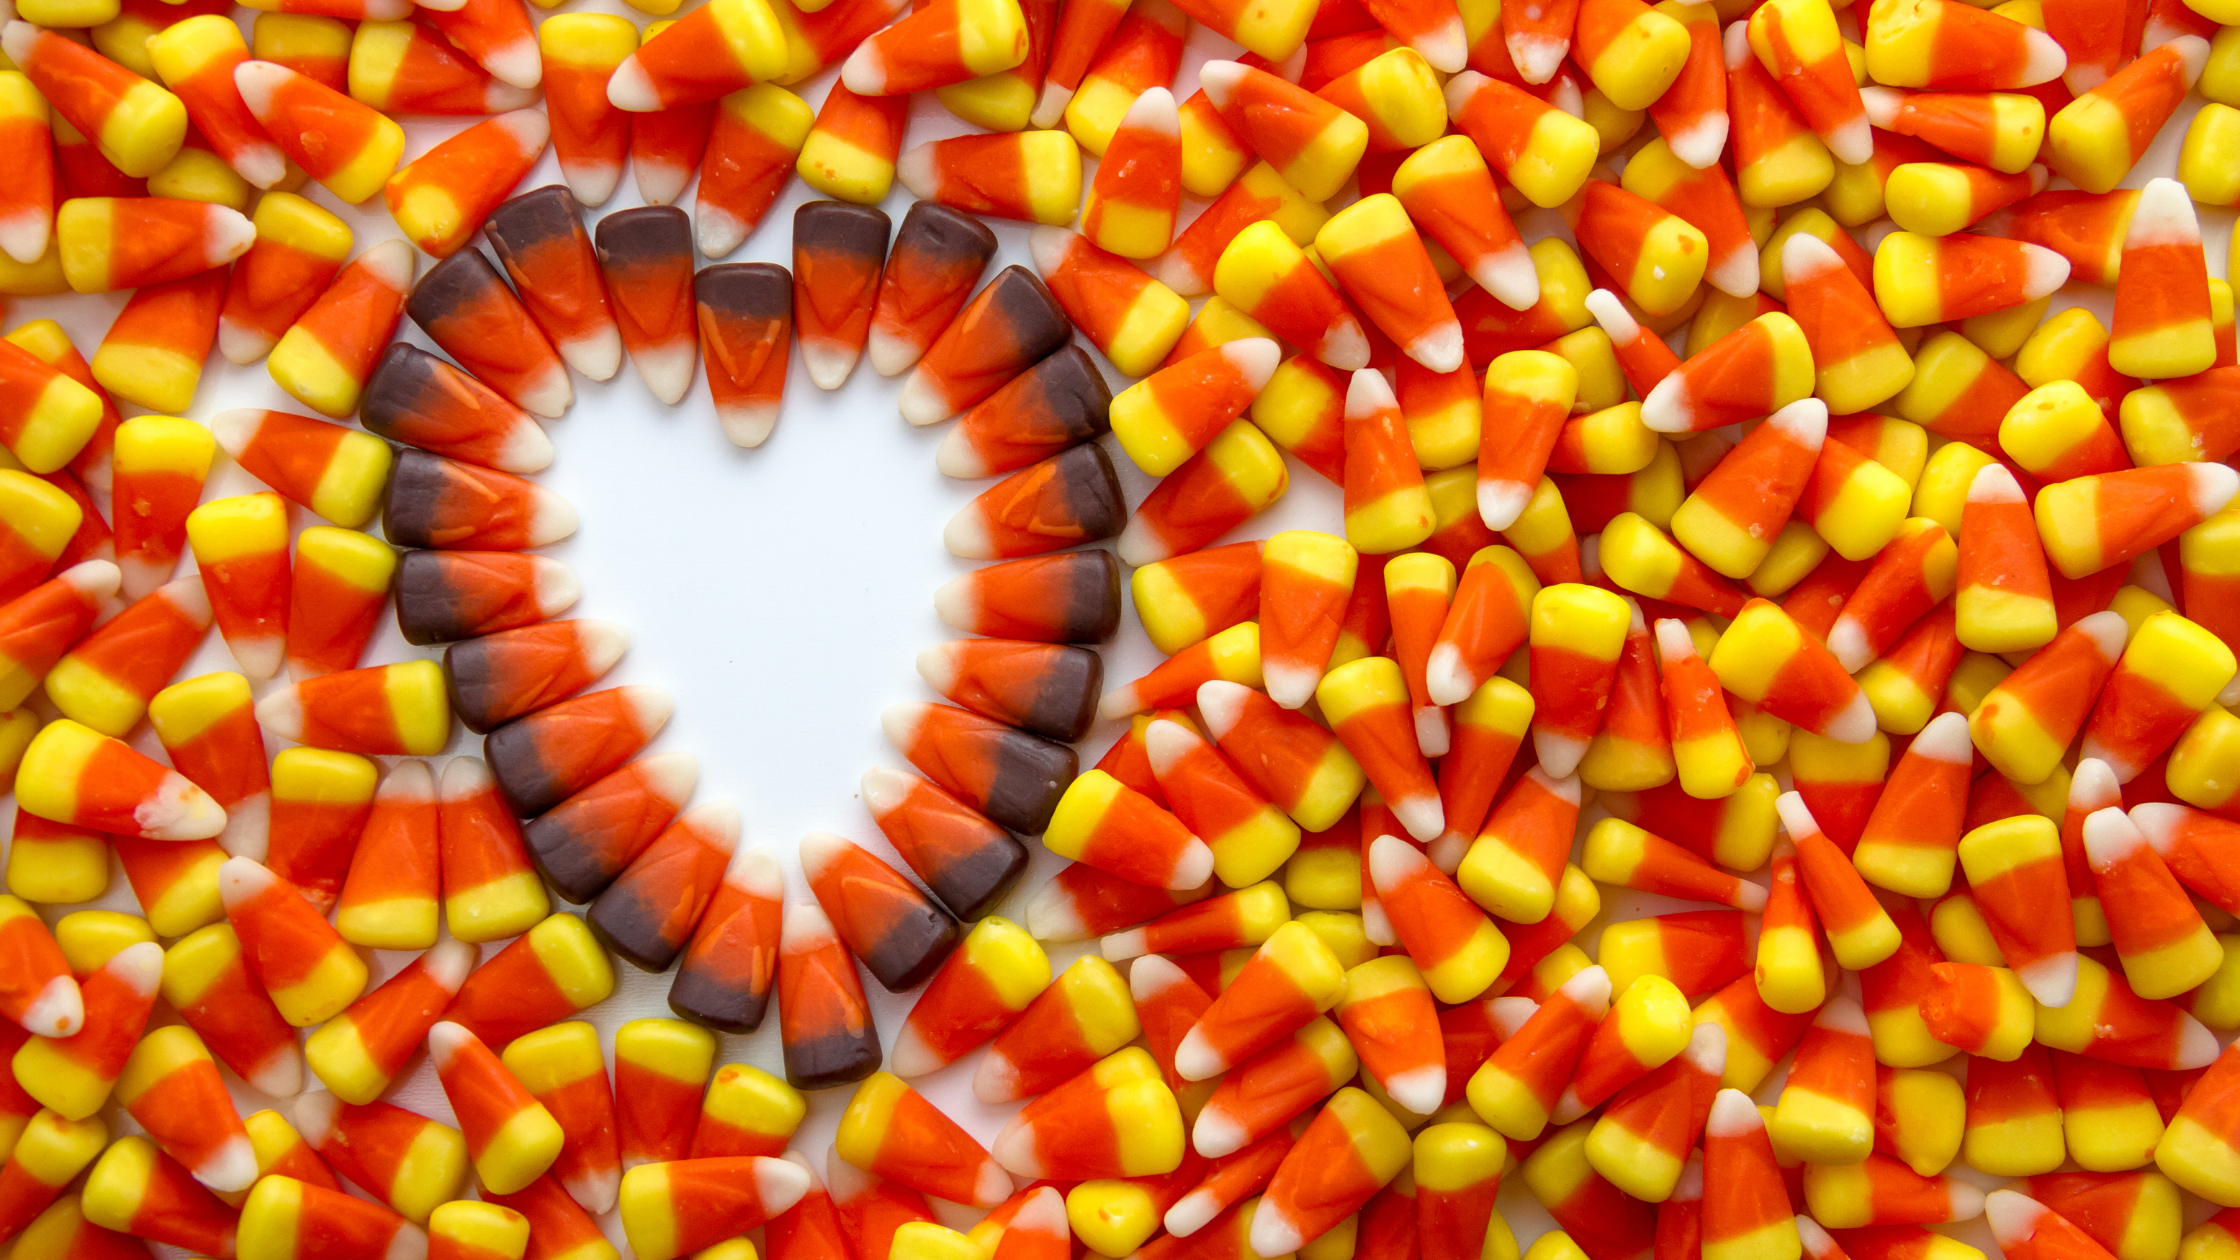 Image of candy corn